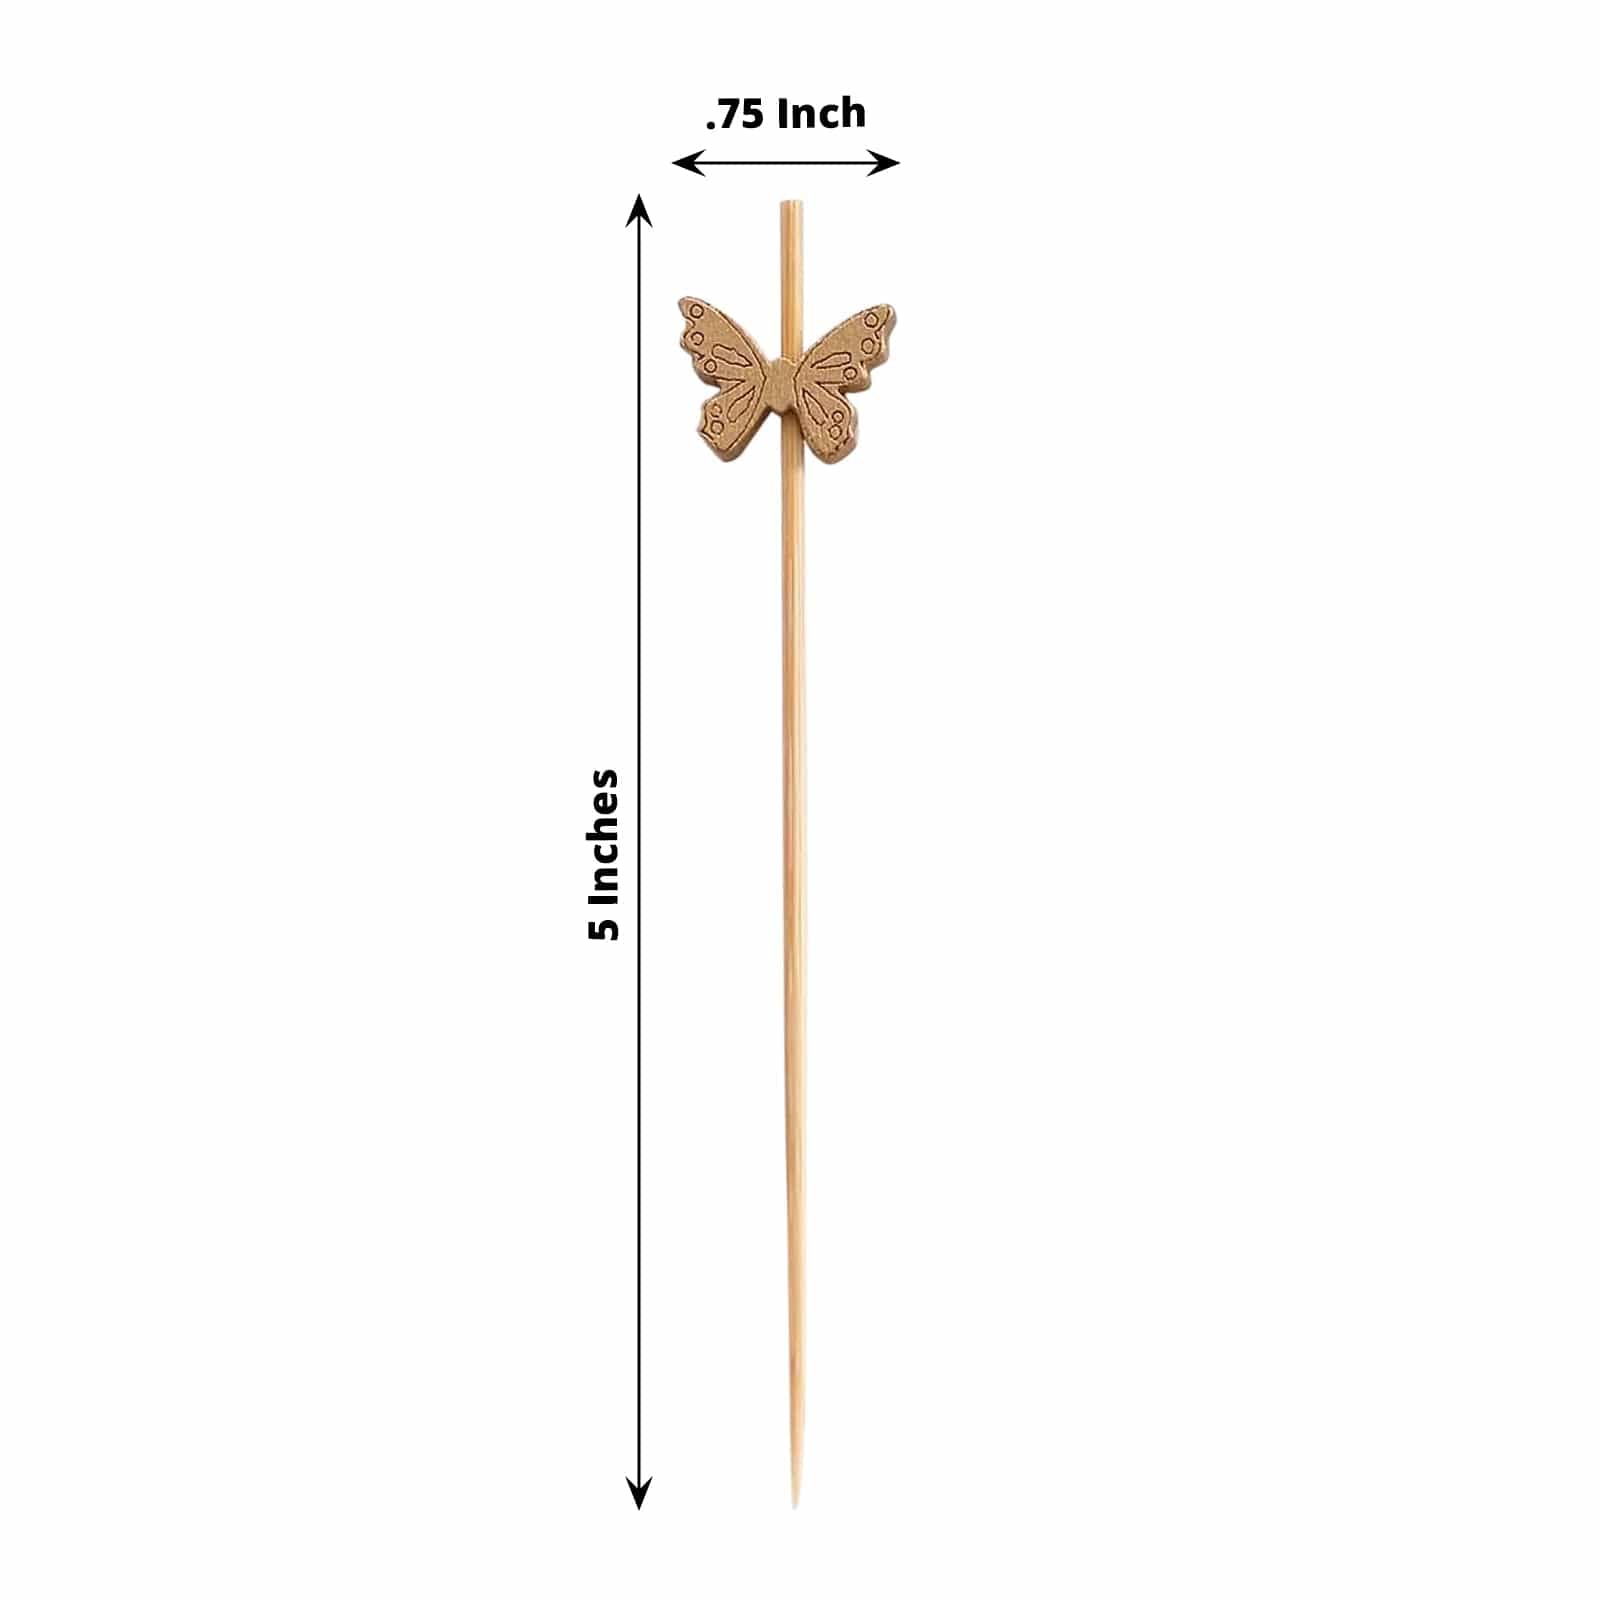 100 Natural Biodegradable Butterfly Cocktail Sticks